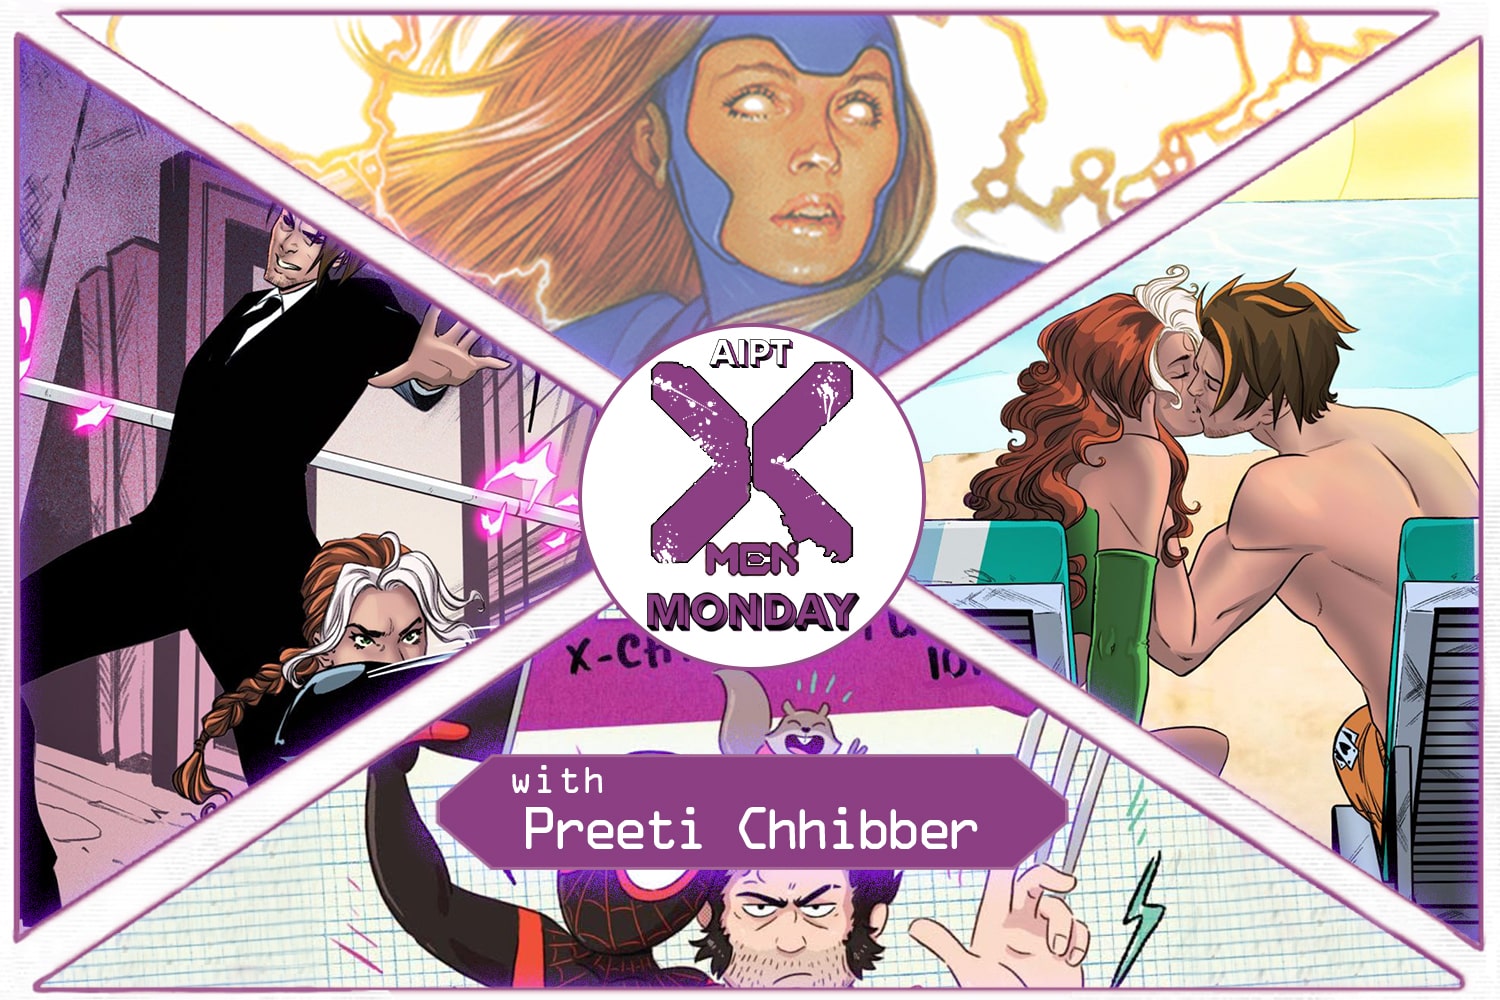 X-Men Monday #222 - Preeti Chhibber Talks 'Love Unlimited', 'Women of Marvel', and More